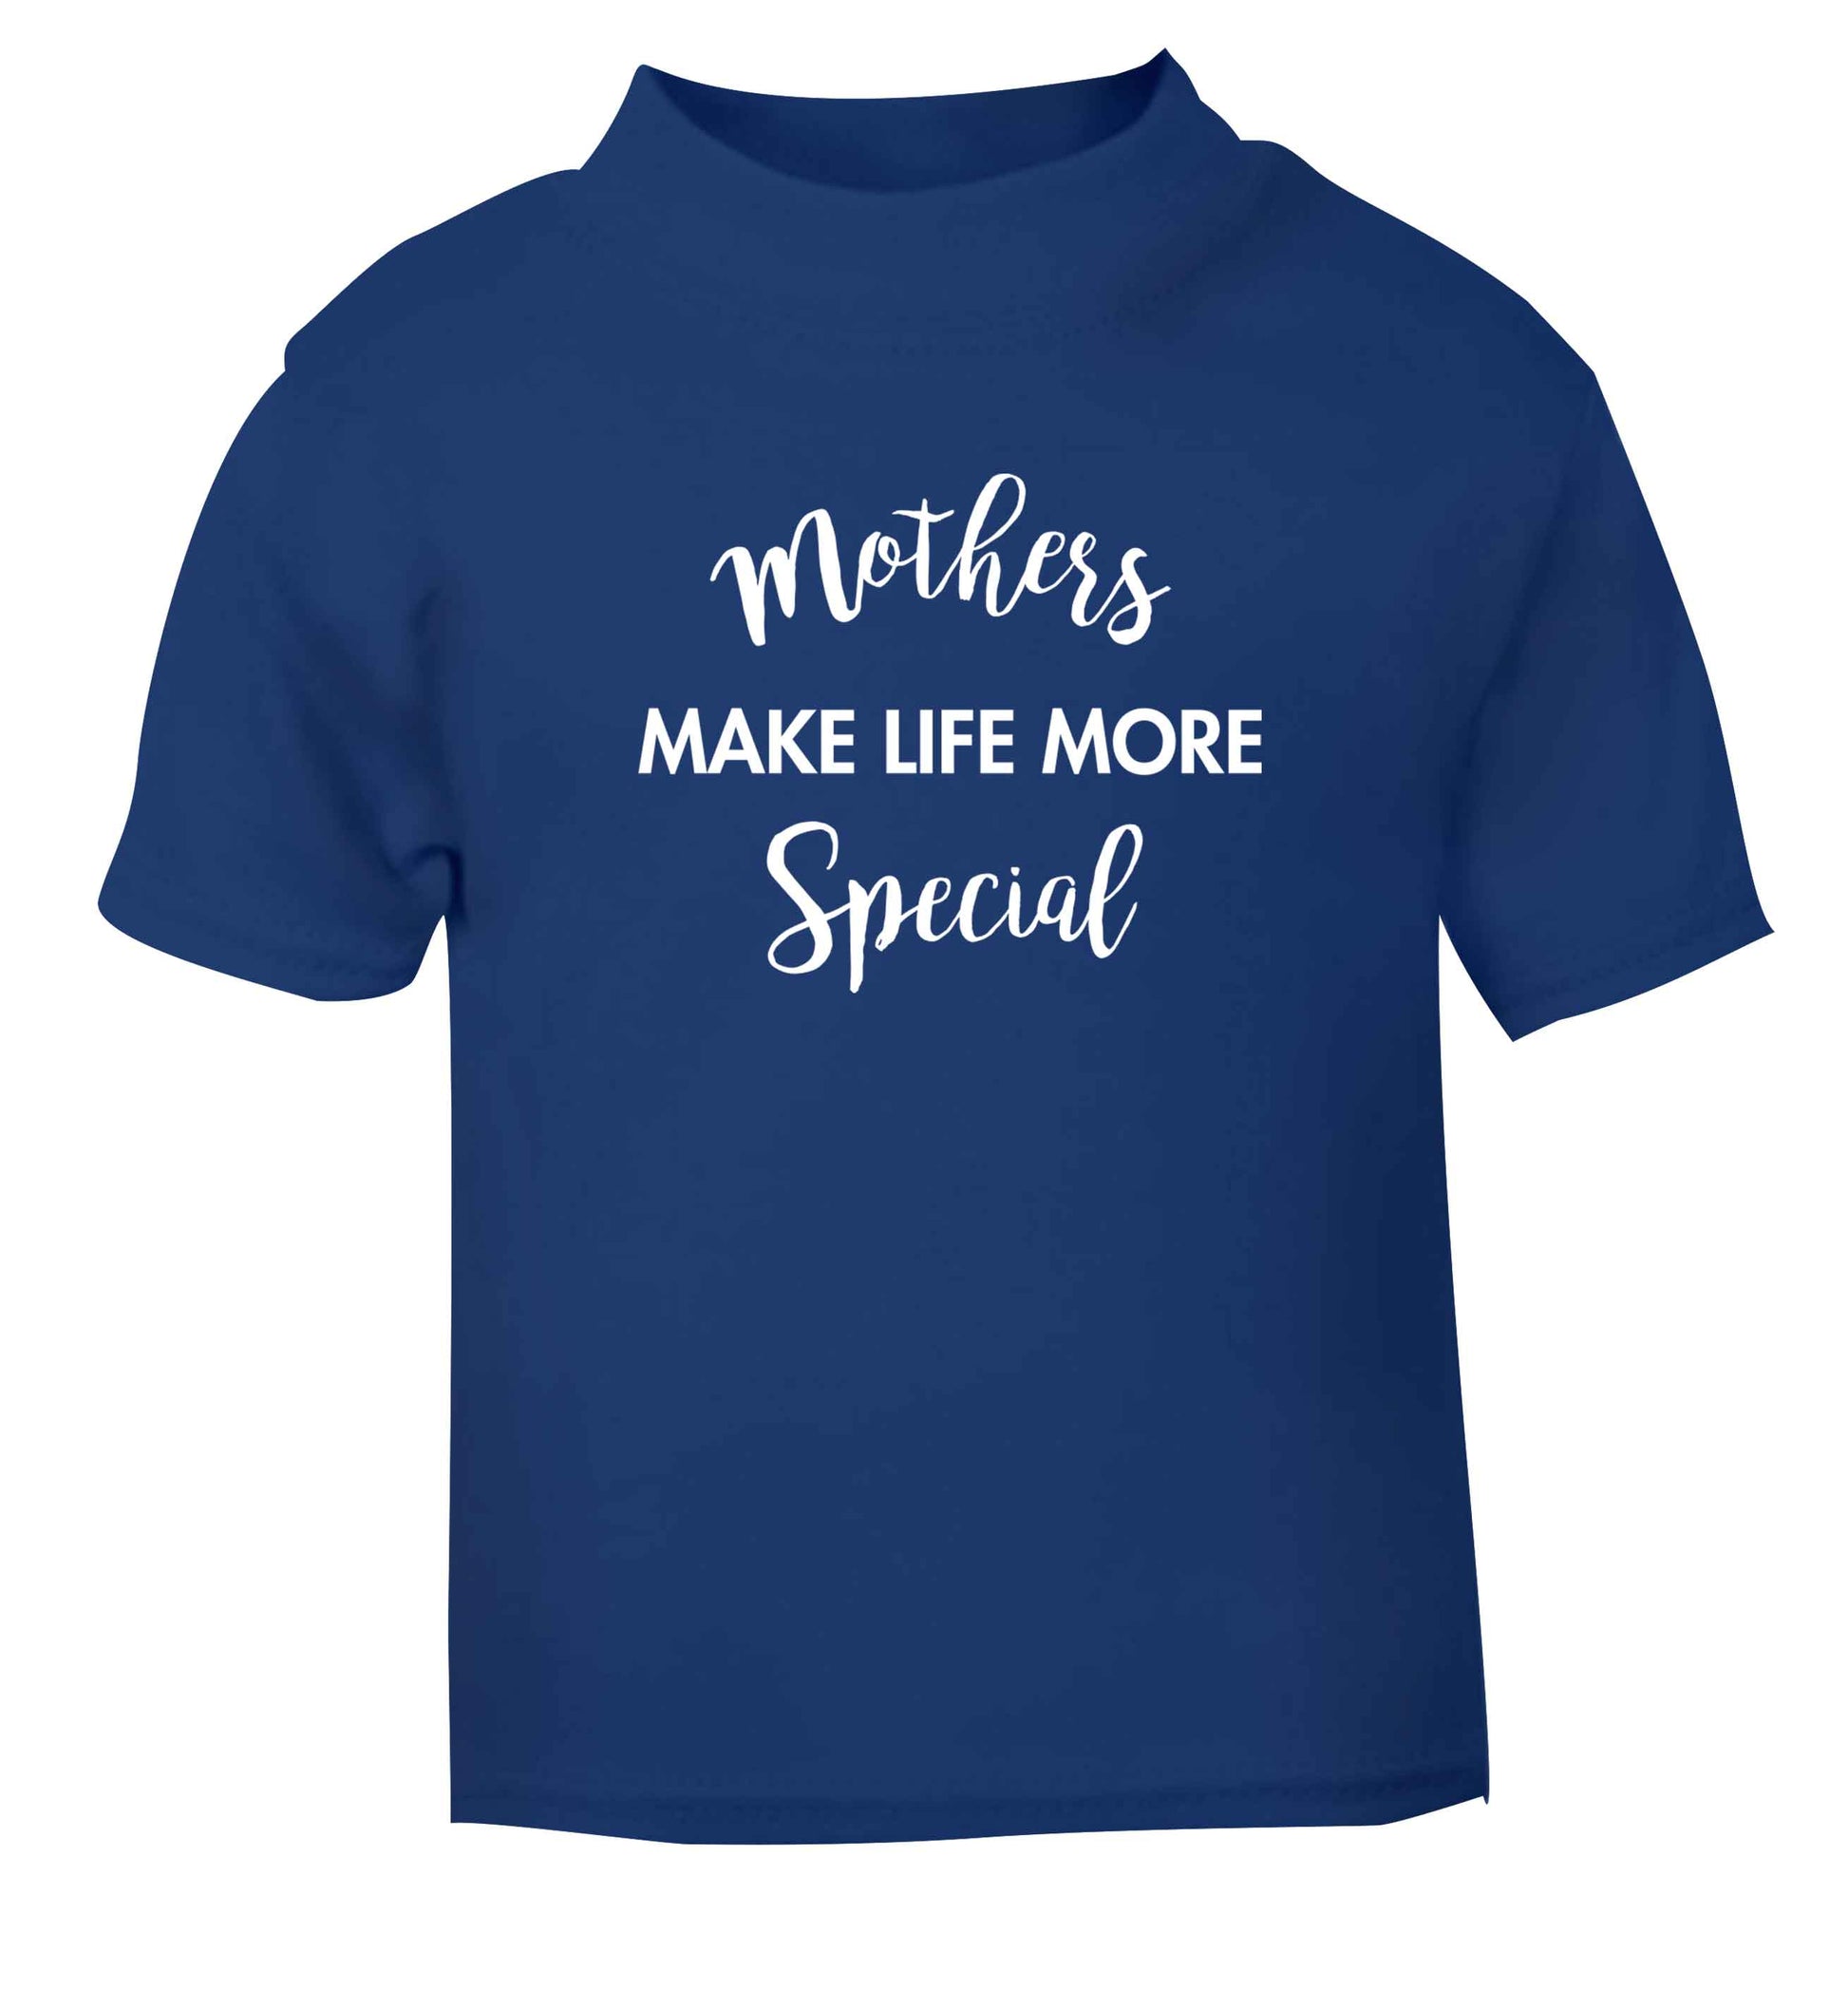 Mother's make life more special blue baby toddler Tshirt 2 Years